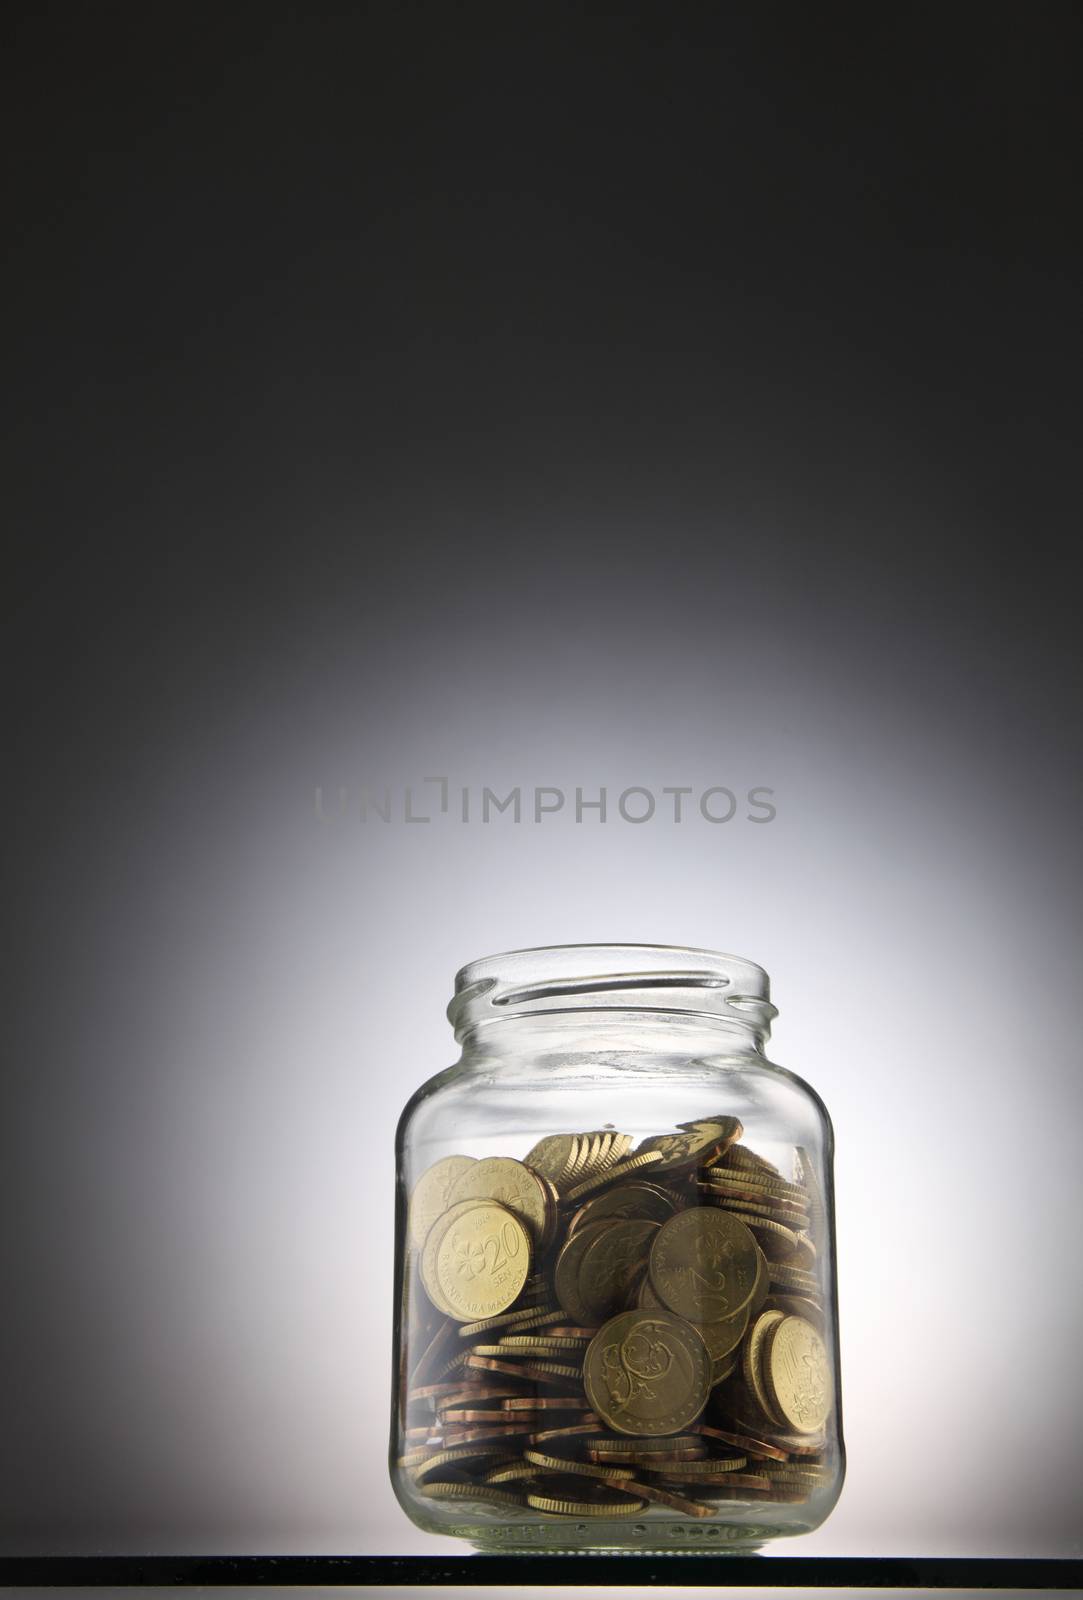 money or coins in the saving jar